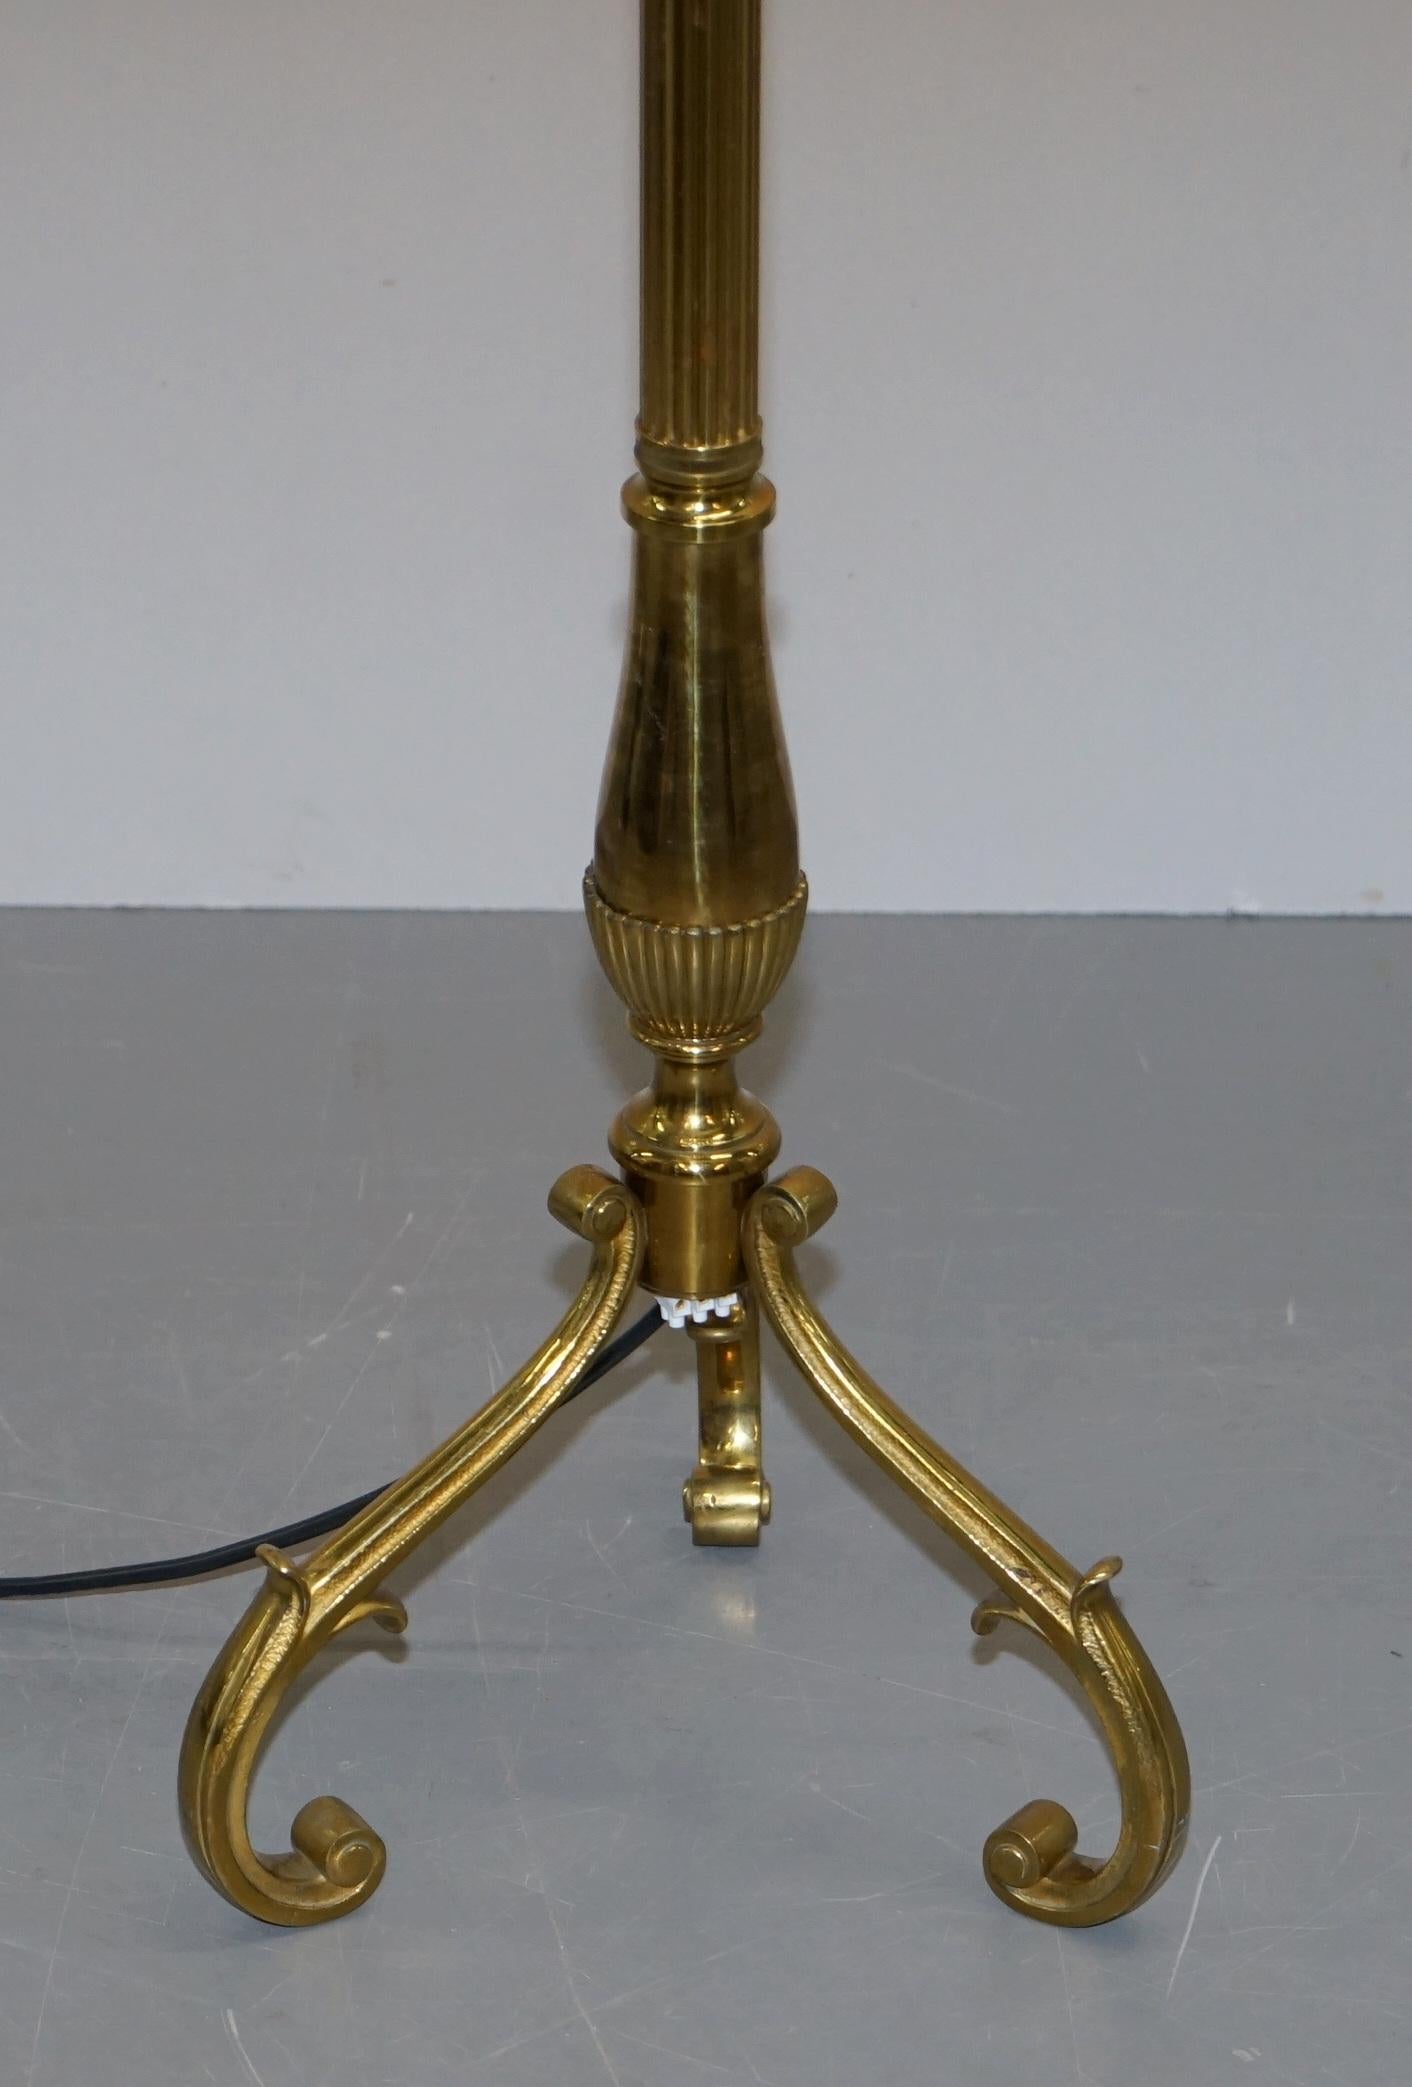 We are delighted to offer for sale this lovely original circa 1880 Antique Victorian floor standing gas lamp which has been converted to electricity 

A good looking and well made piece, originally it would have had a gas lantern however it was